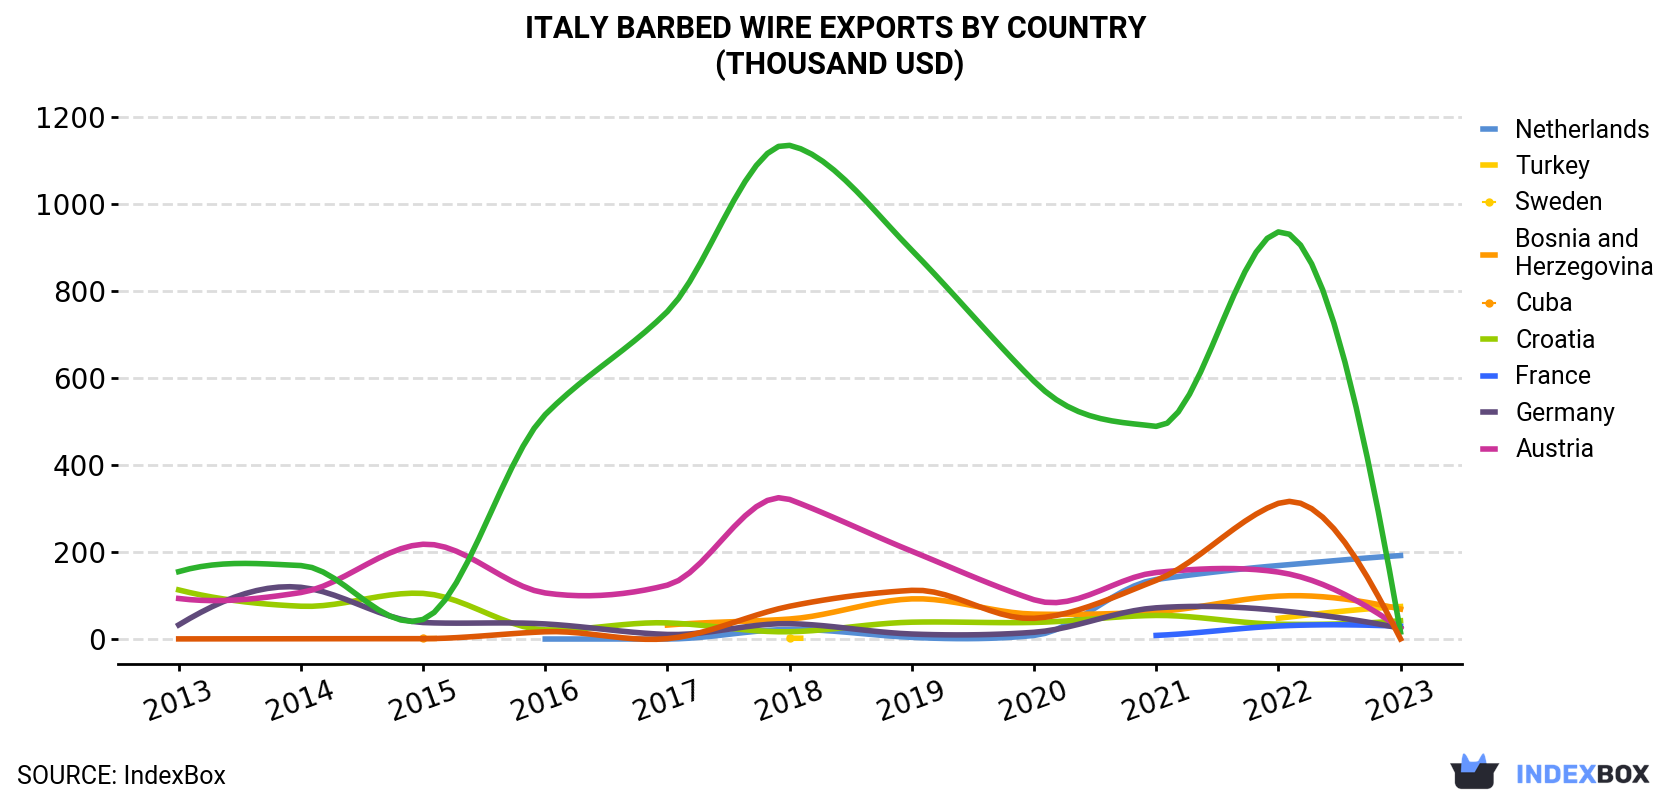 Italy Barbed Wire Exports By Country (Thousand USD)